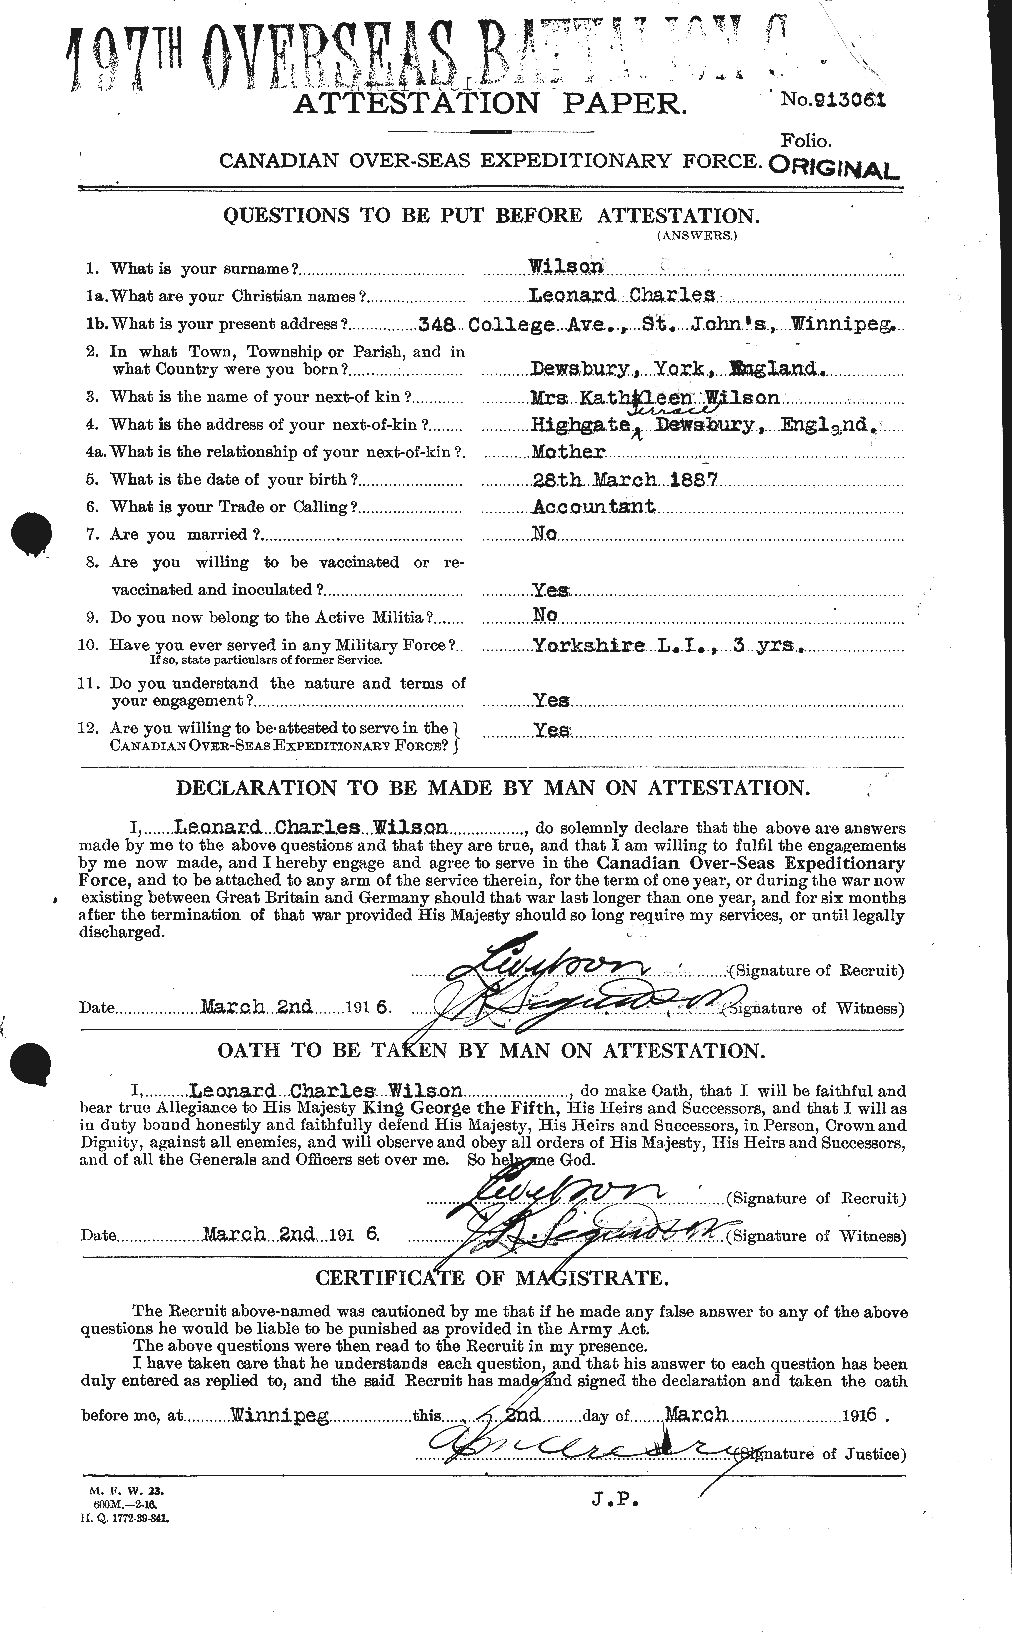 Personnel Records of the First World War - CEF 678638a